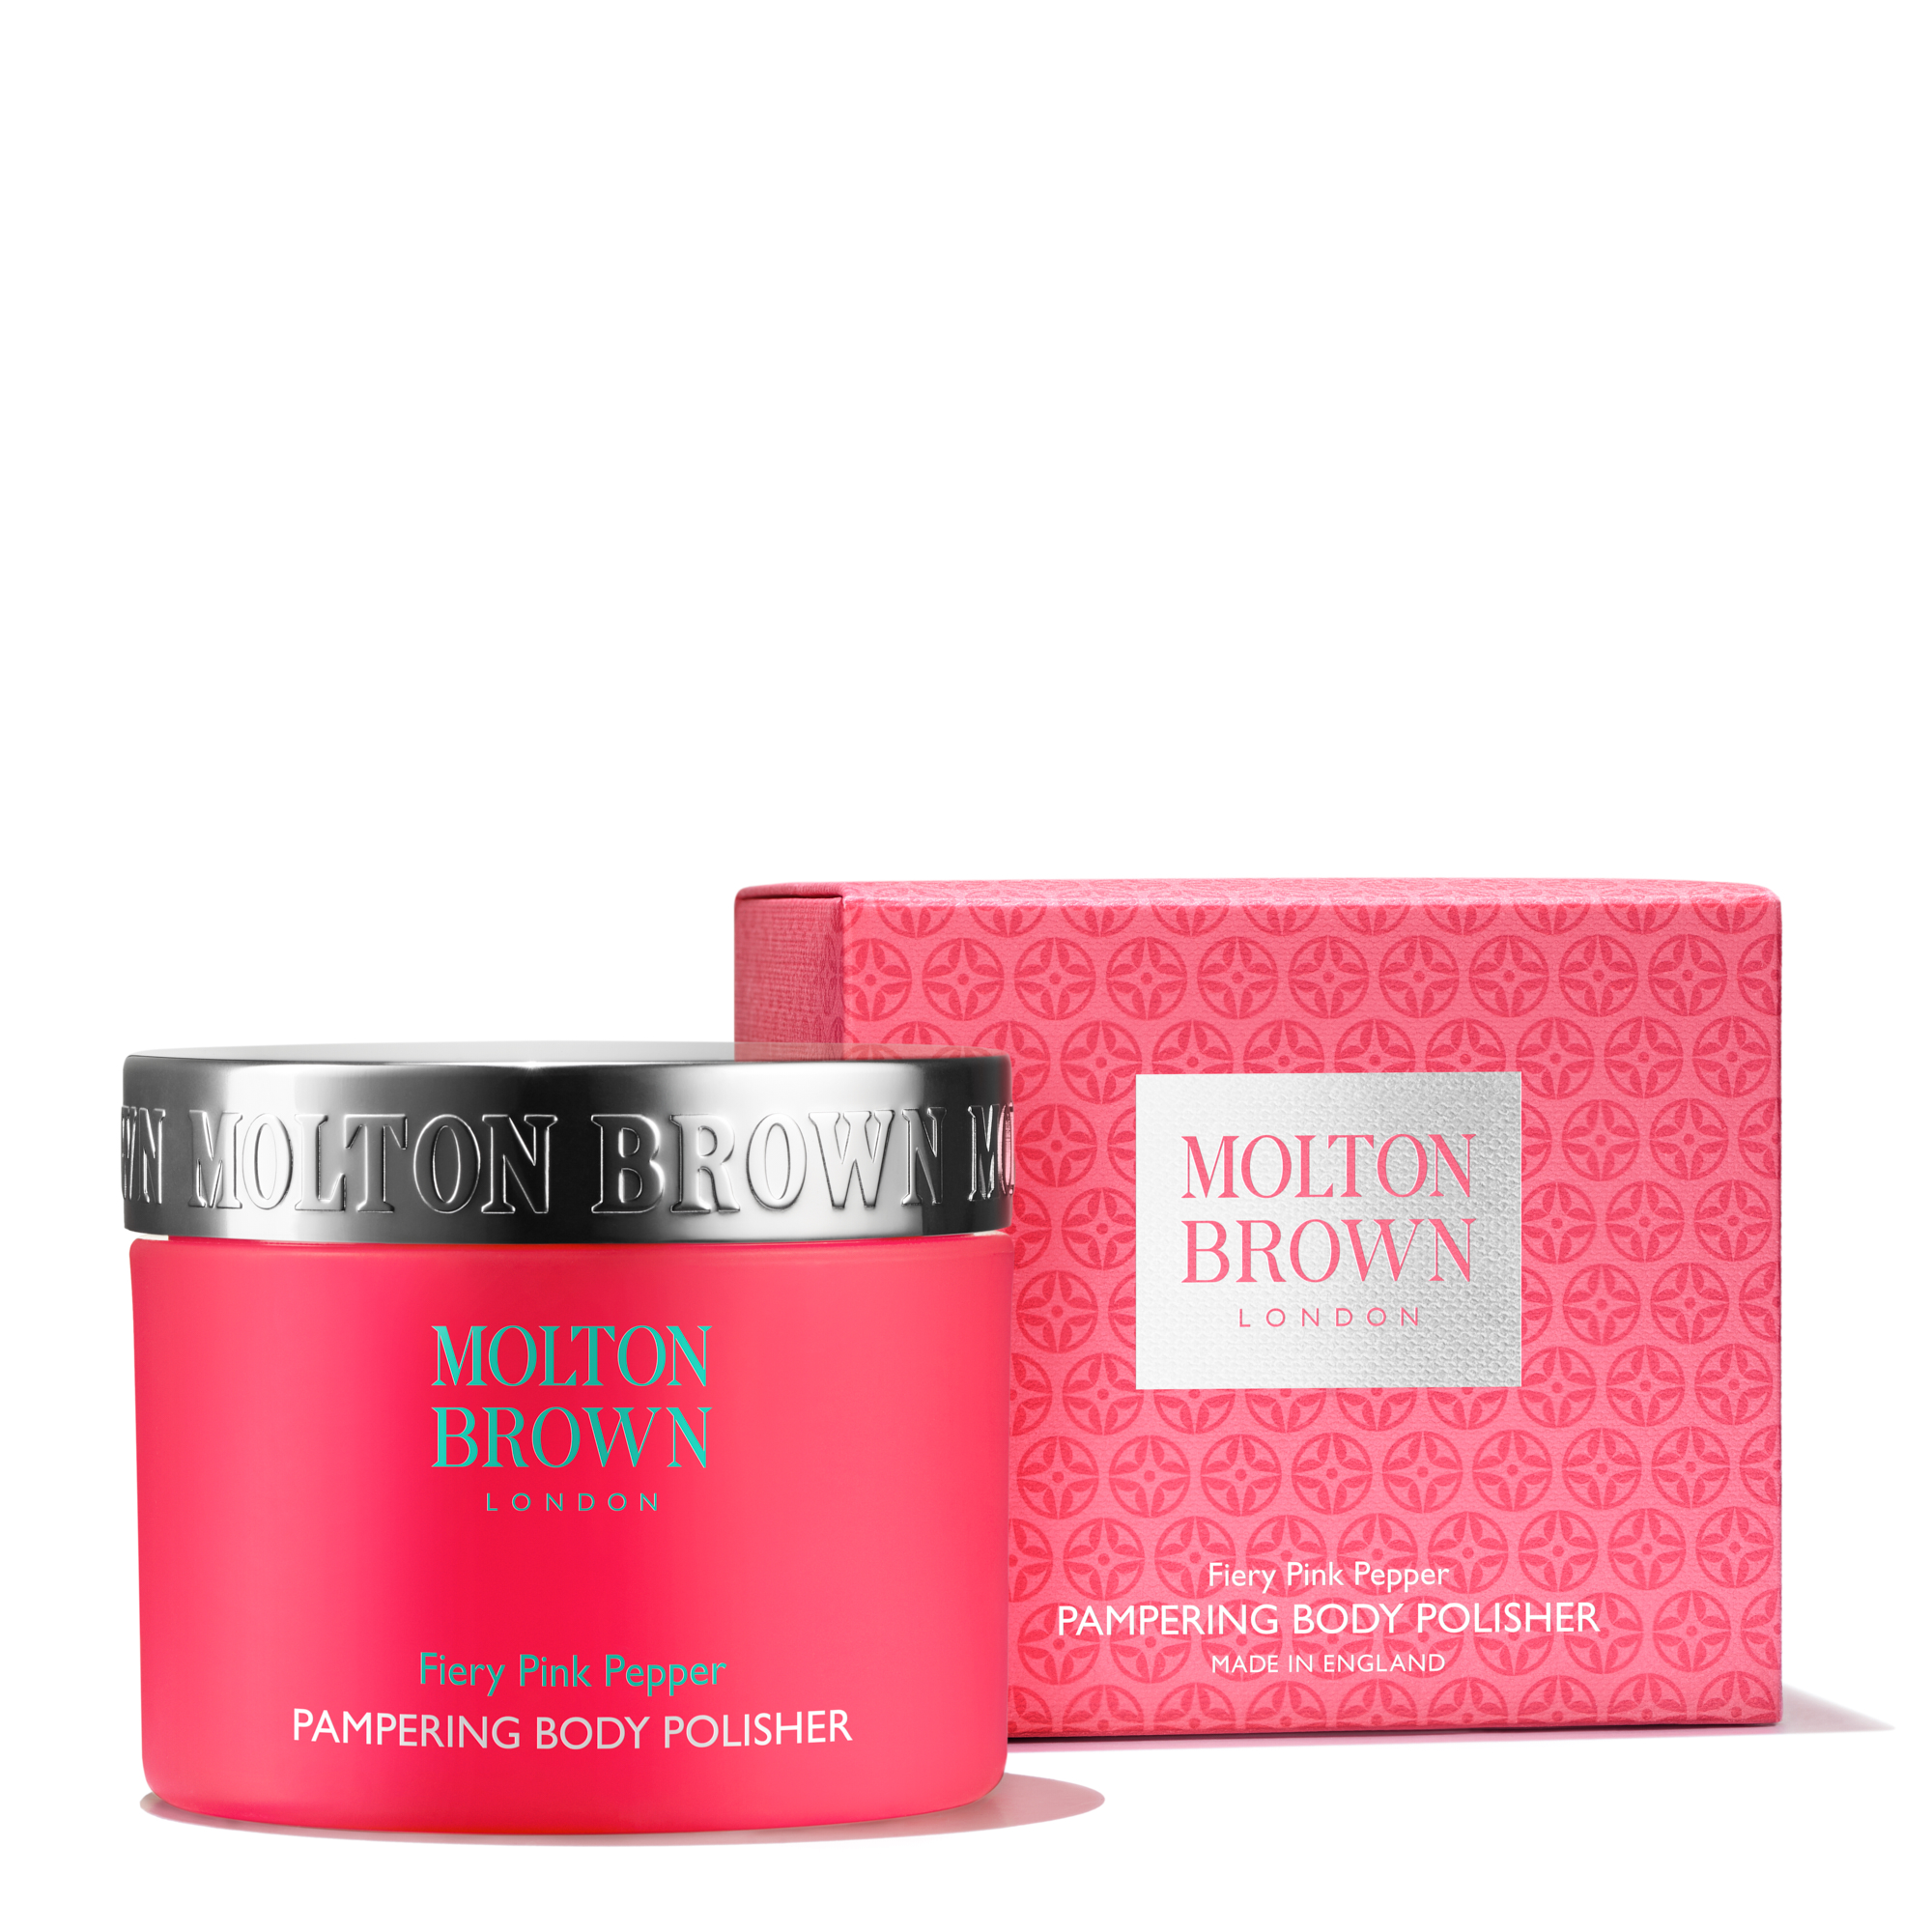 Molton Brown FIERY PINK PEPPER PAMPERING BODY POLISHER